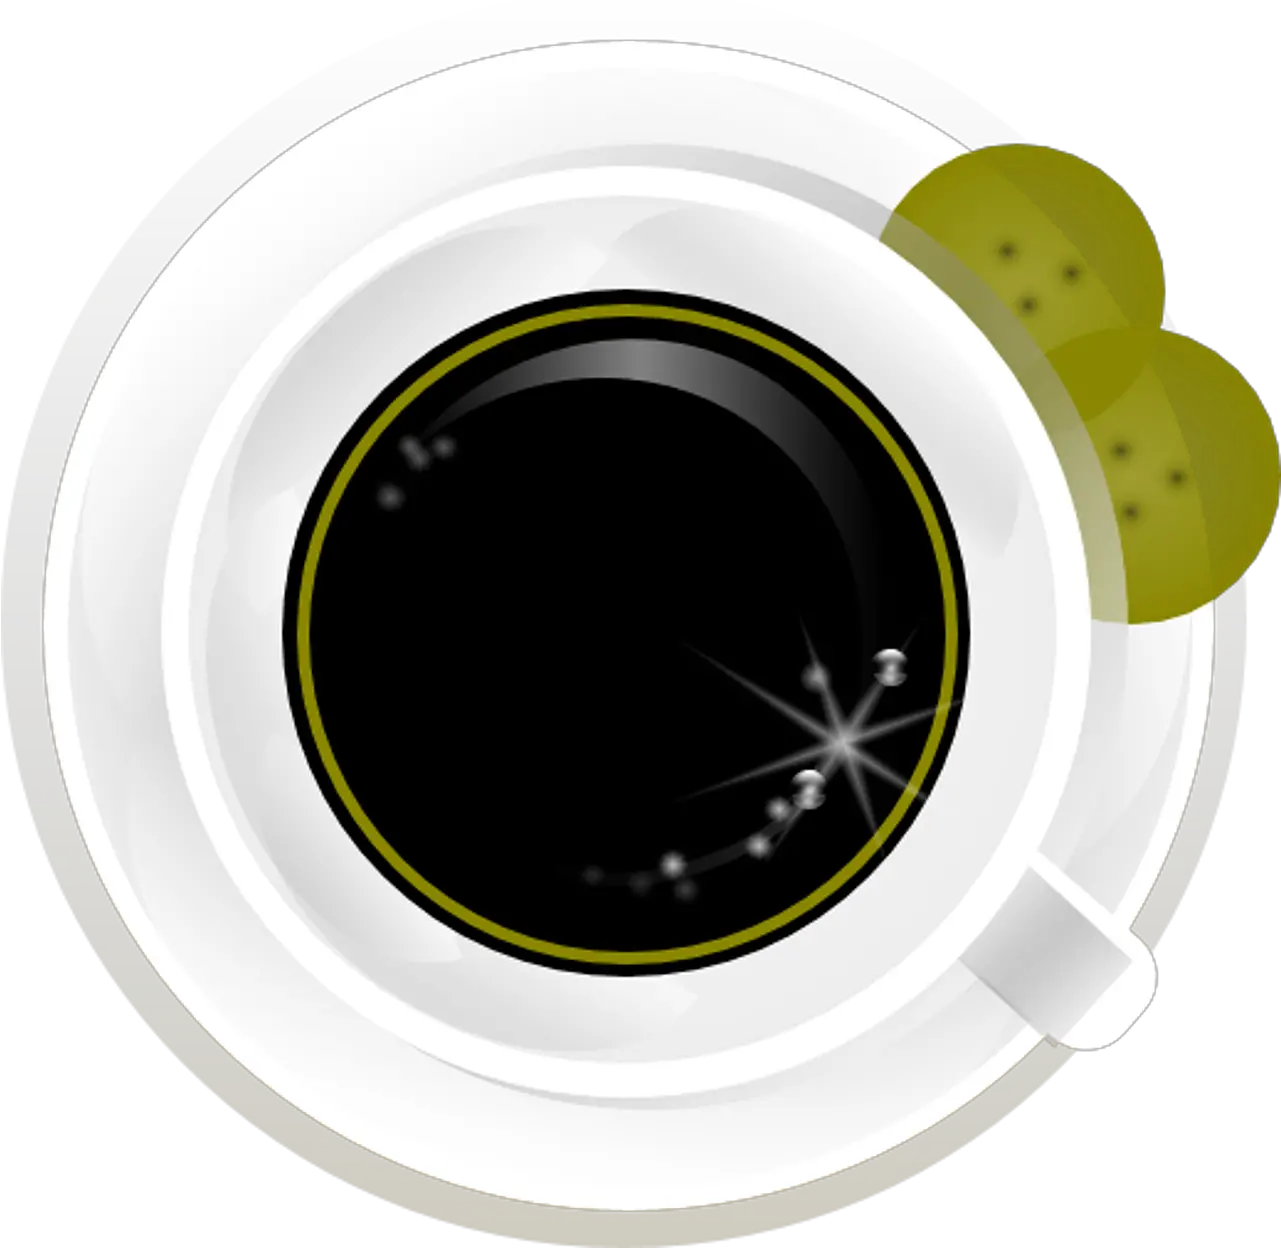 Coffee Cookies Cup Free Image On Pixabay Circle Png Plate Of Cookies Png